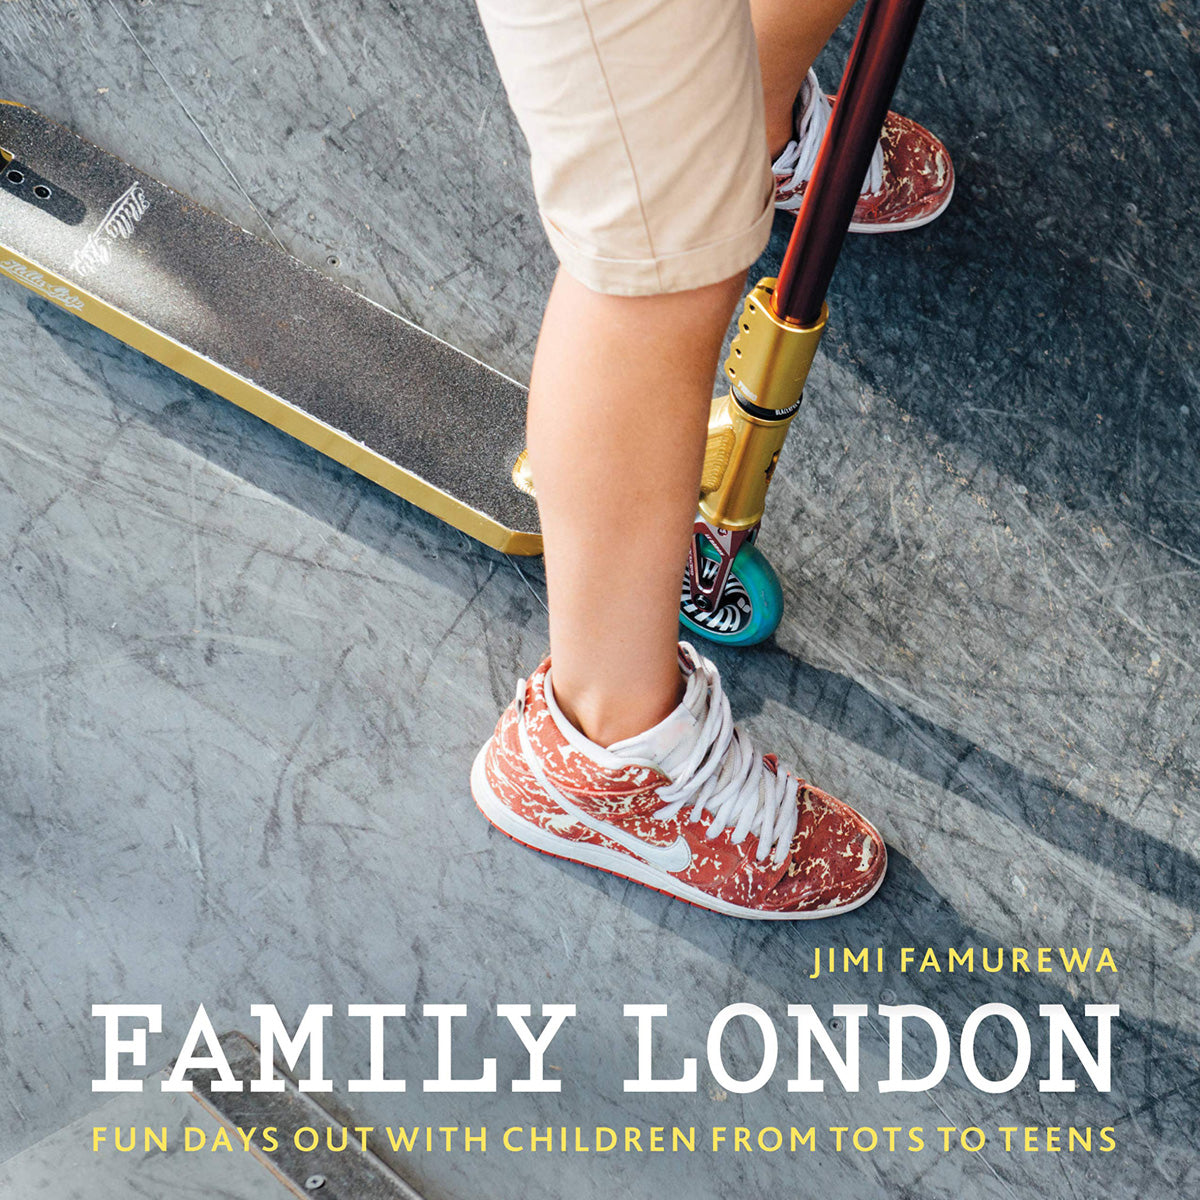 Family London: Fun Days Out With Children From Tots To Teens Book By Jimi Famurewa 1